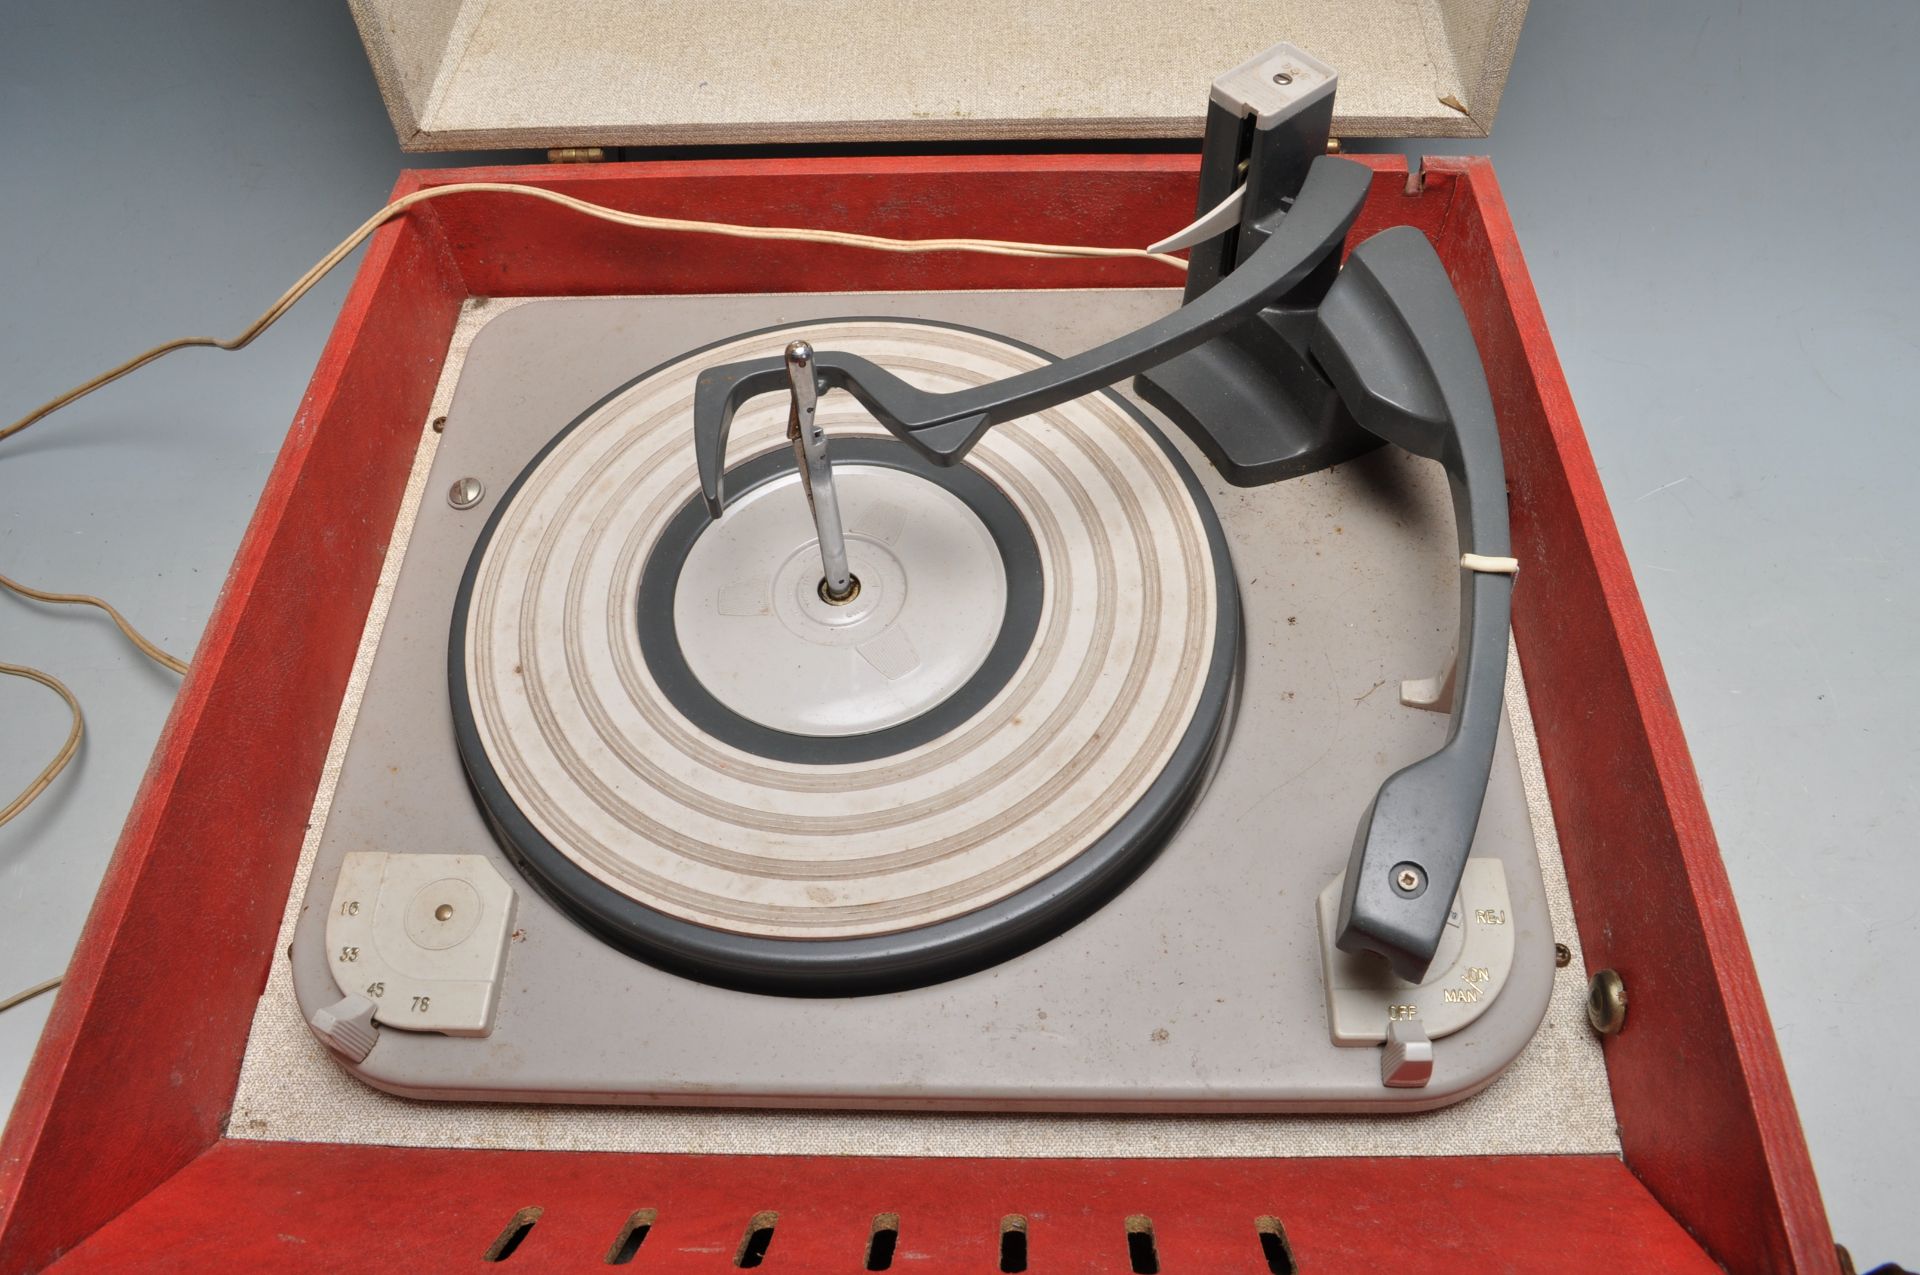 A VINTAGE RETRO ELIZABETHAN POP TEN RECORD PLAYER IN RED AND CREAM - Image 2 of 6